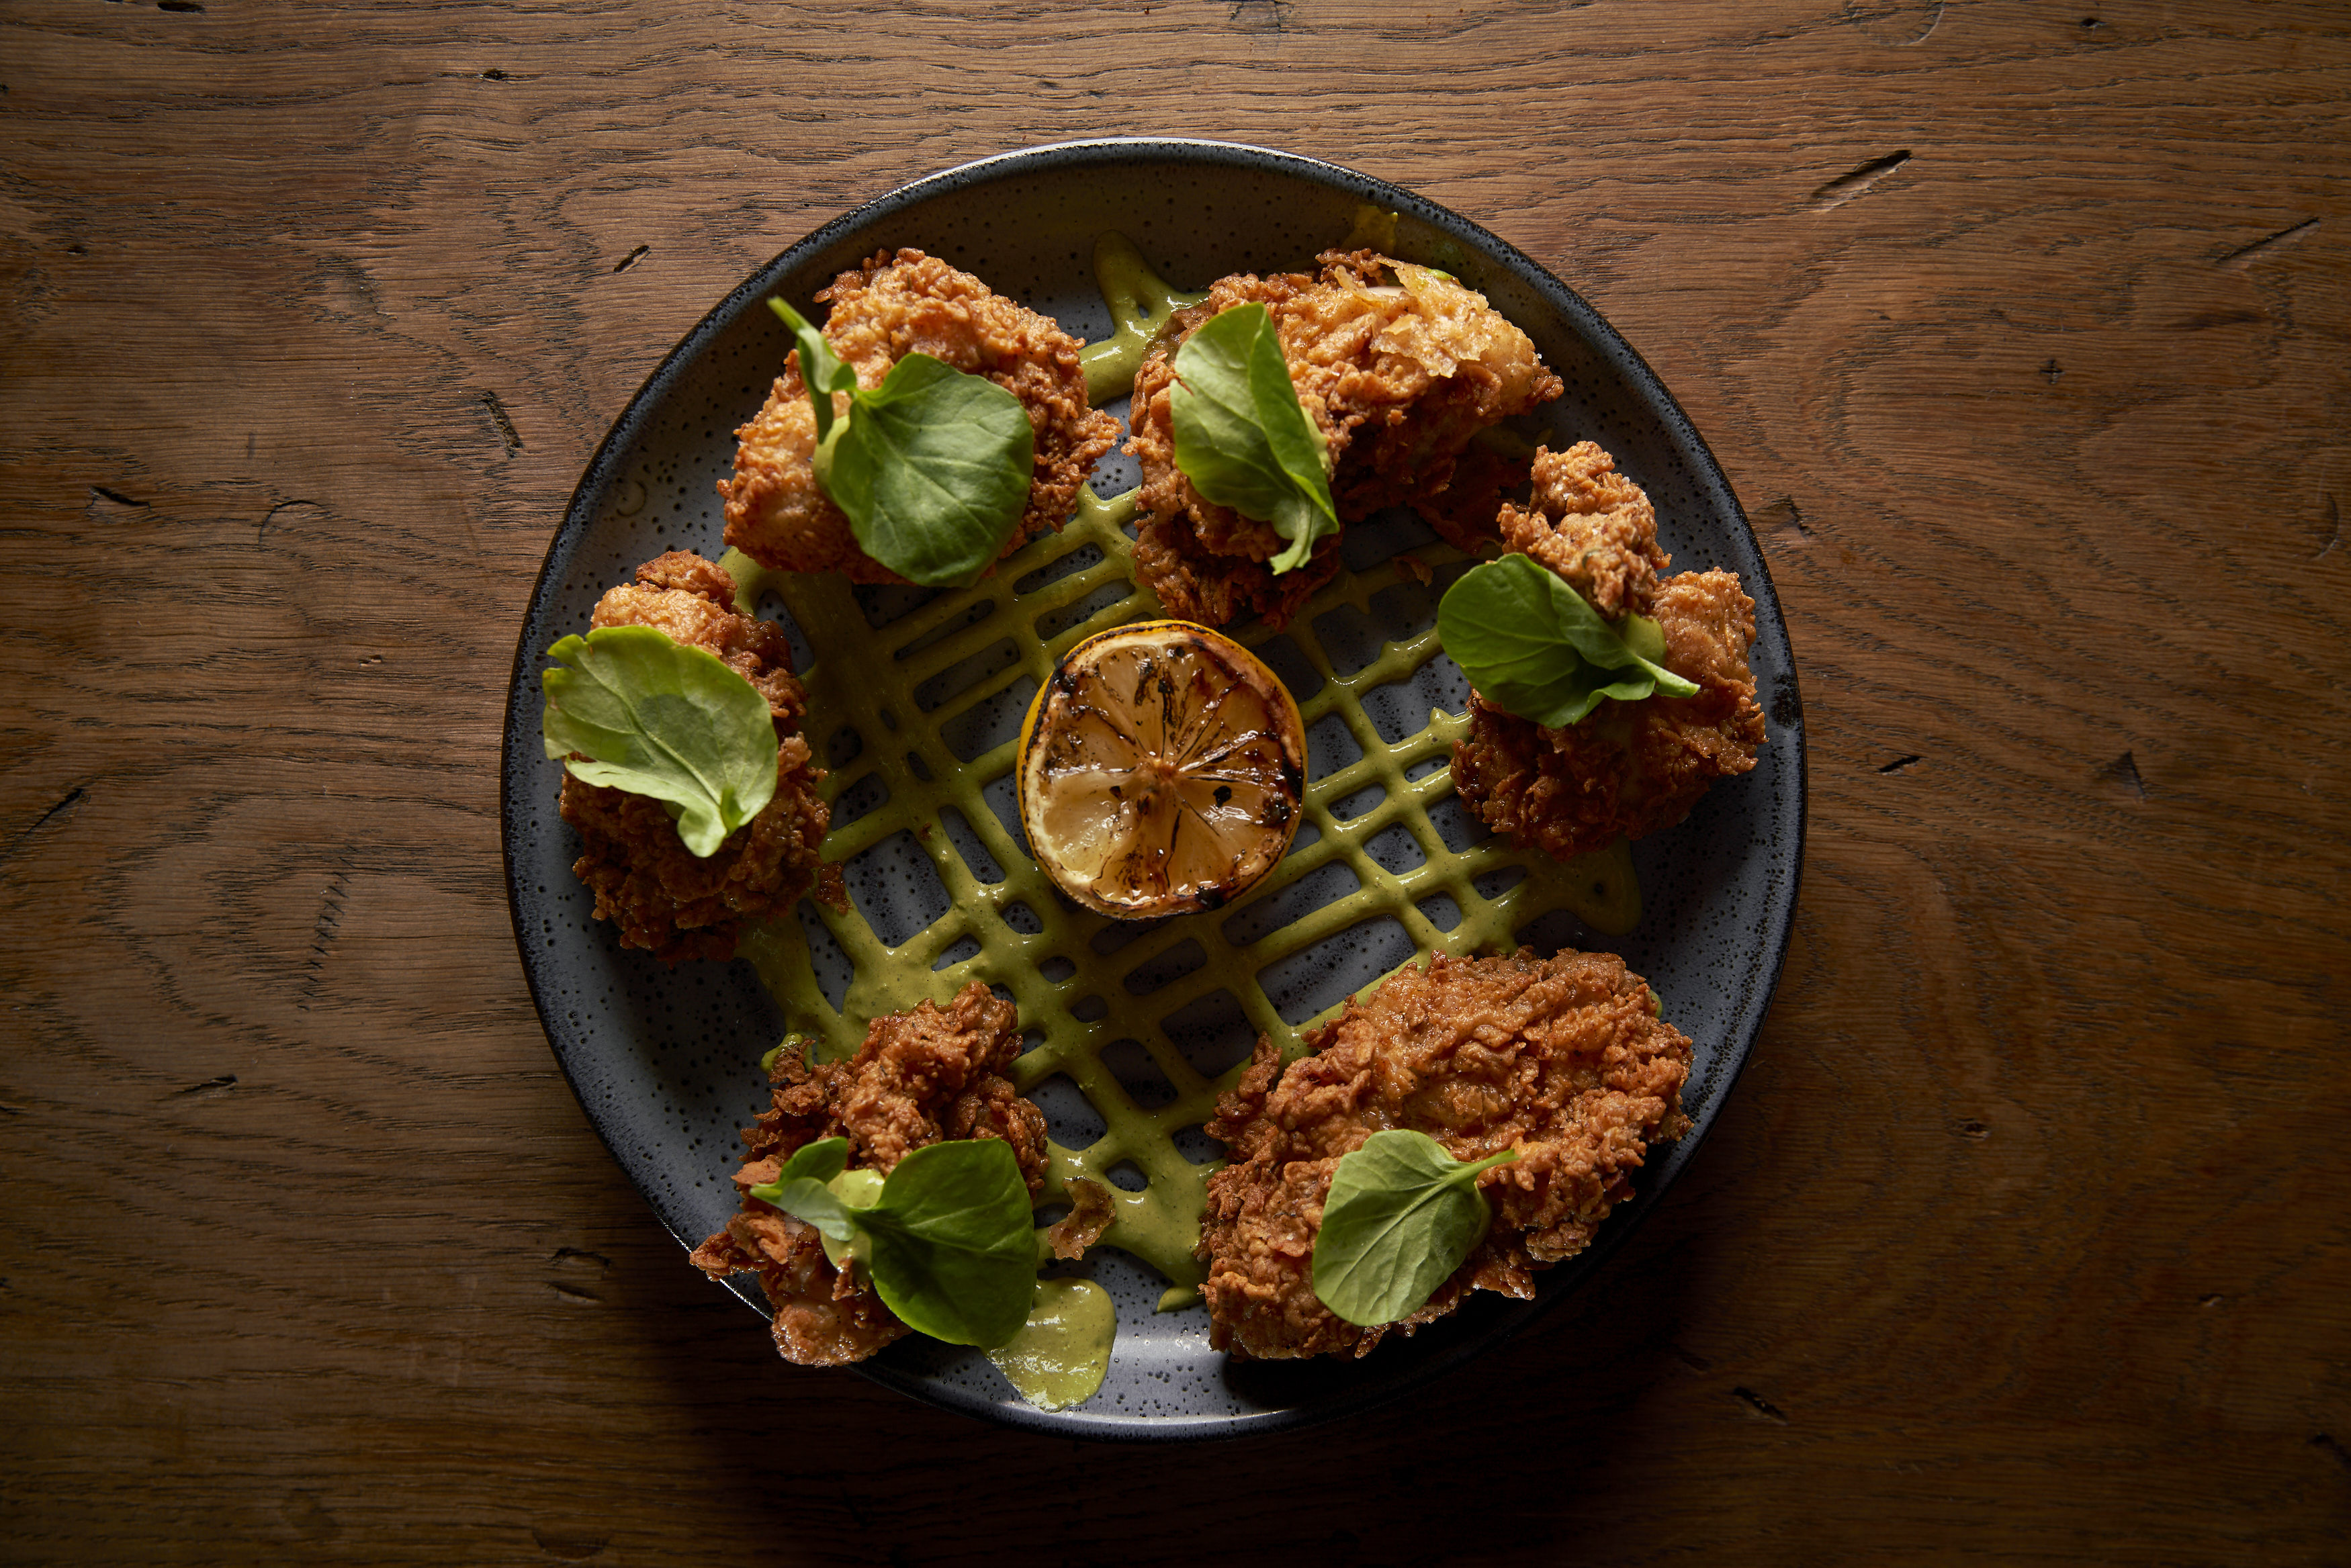 Crispy fried oysters from Ember Miami at the Miami Design District